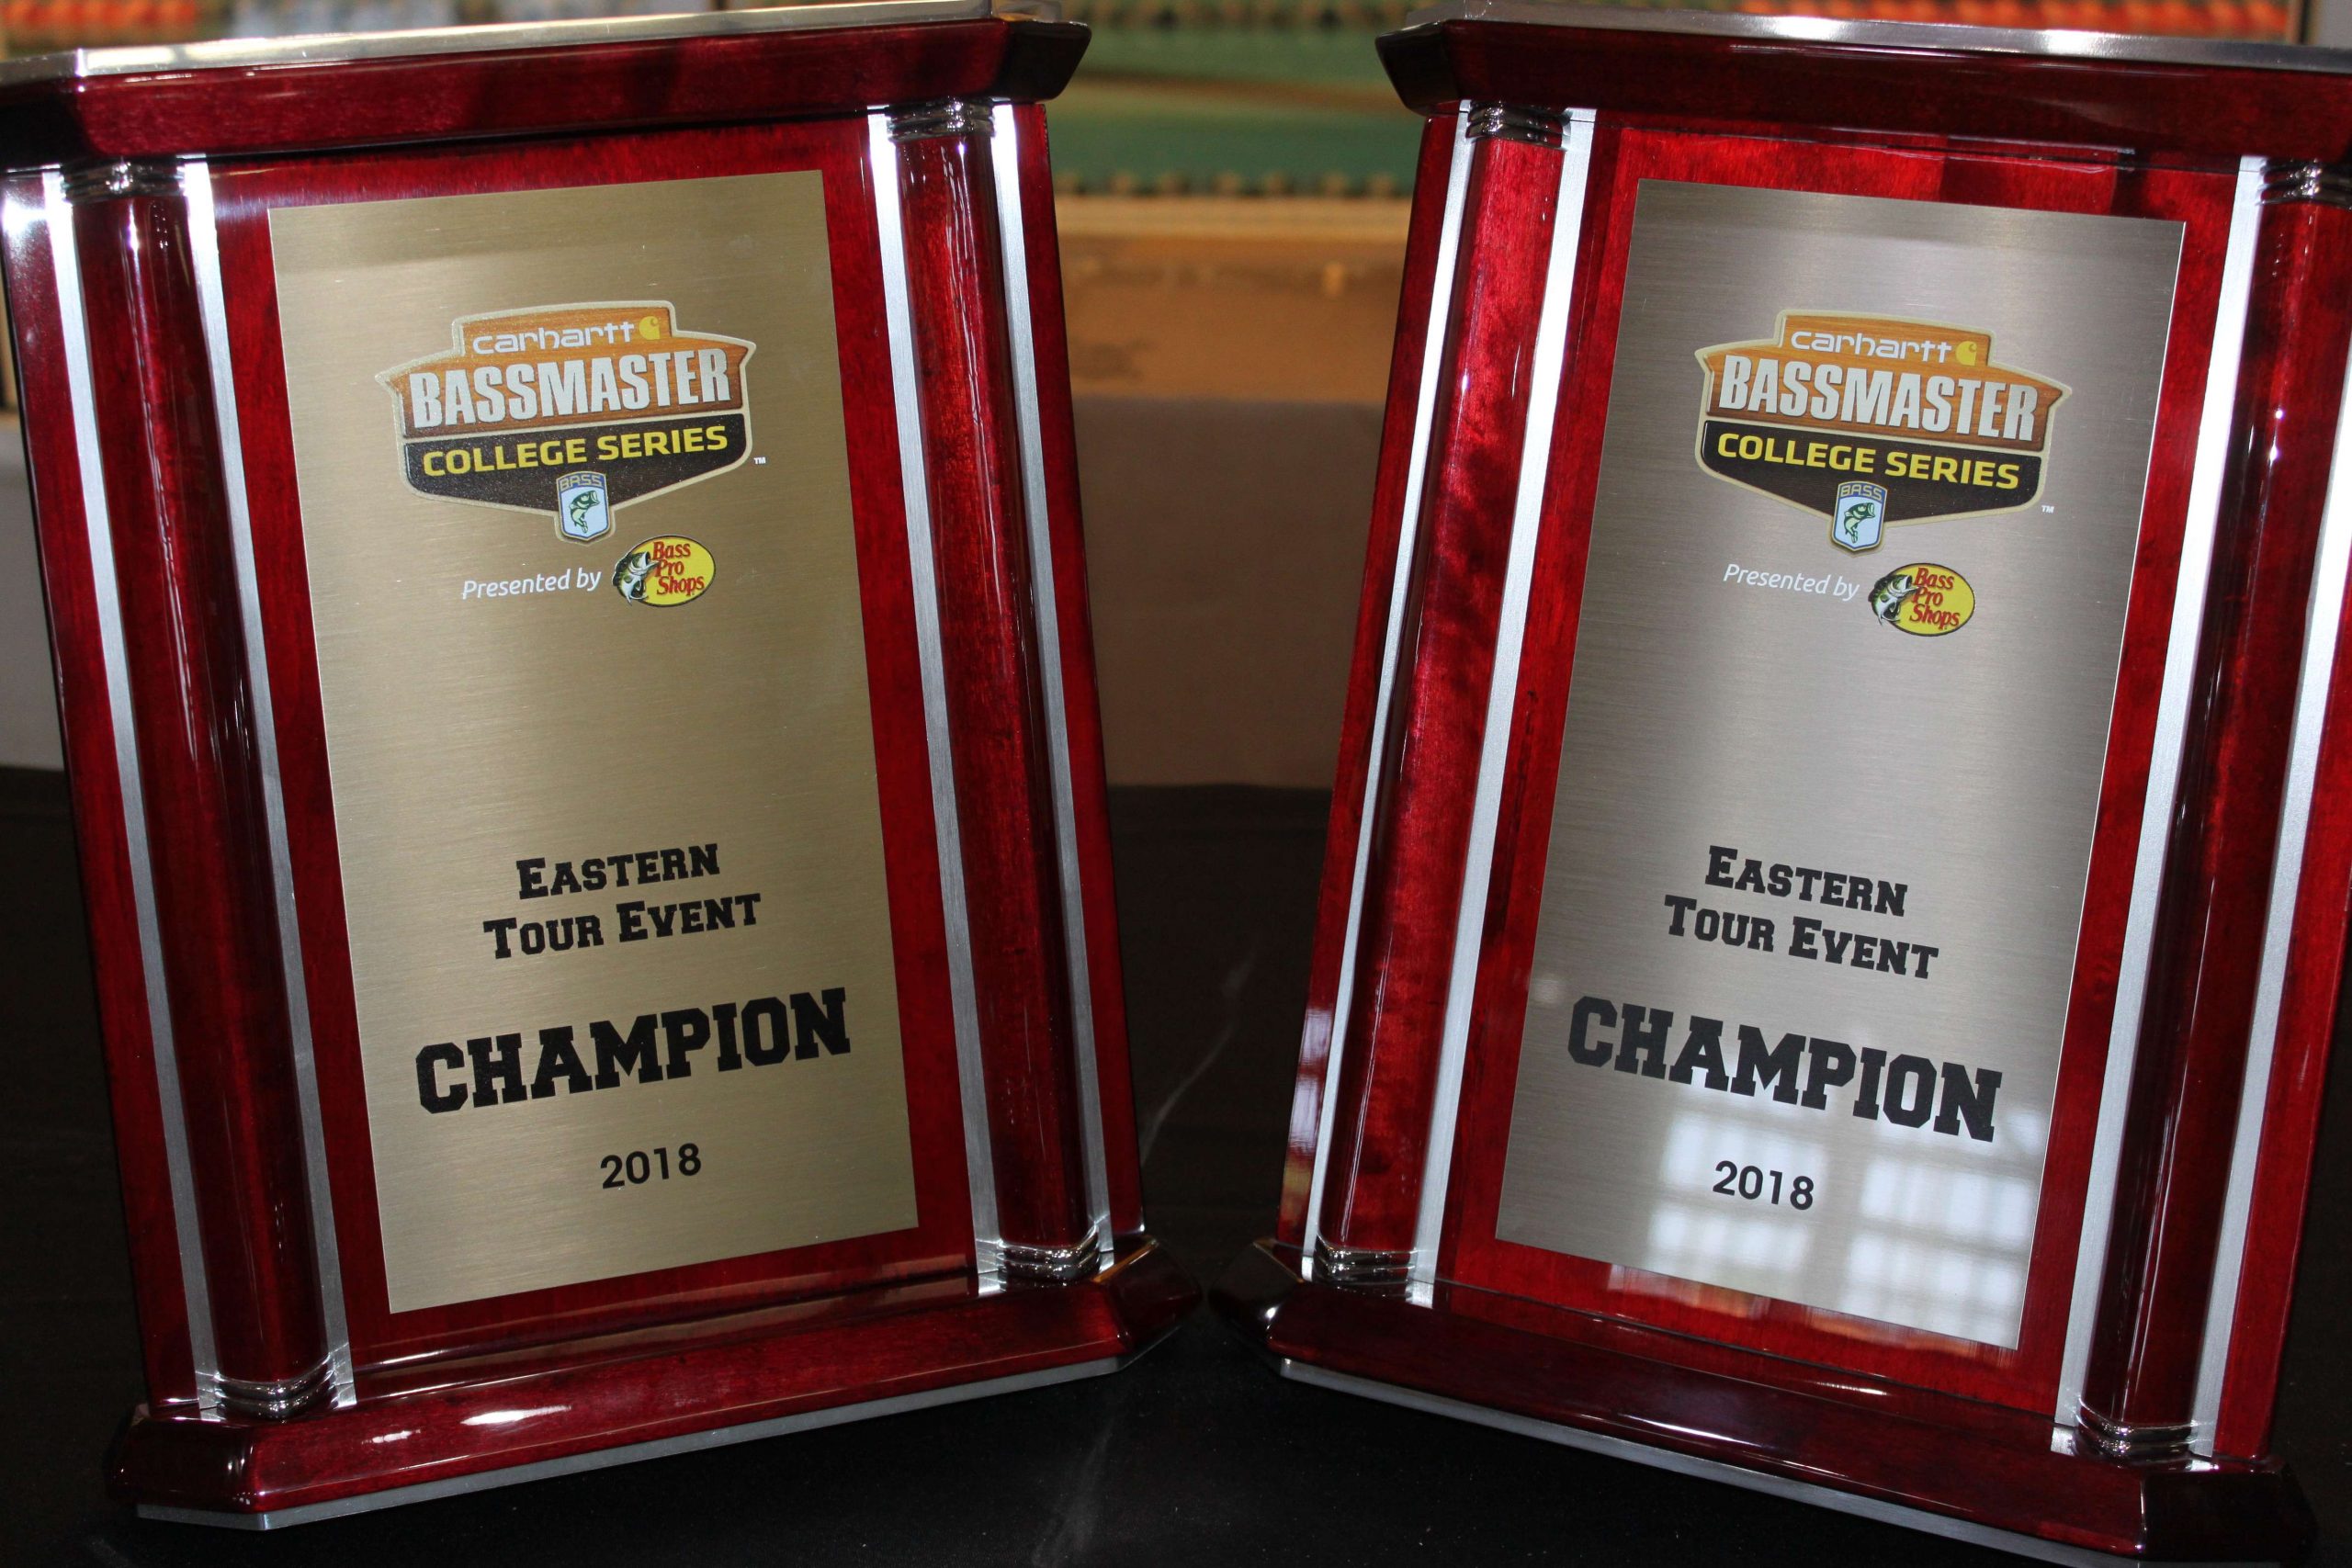 And the winning tandem will take home this fine pair of trophies, not to mention add valuable points in the College Team of the Year standings.